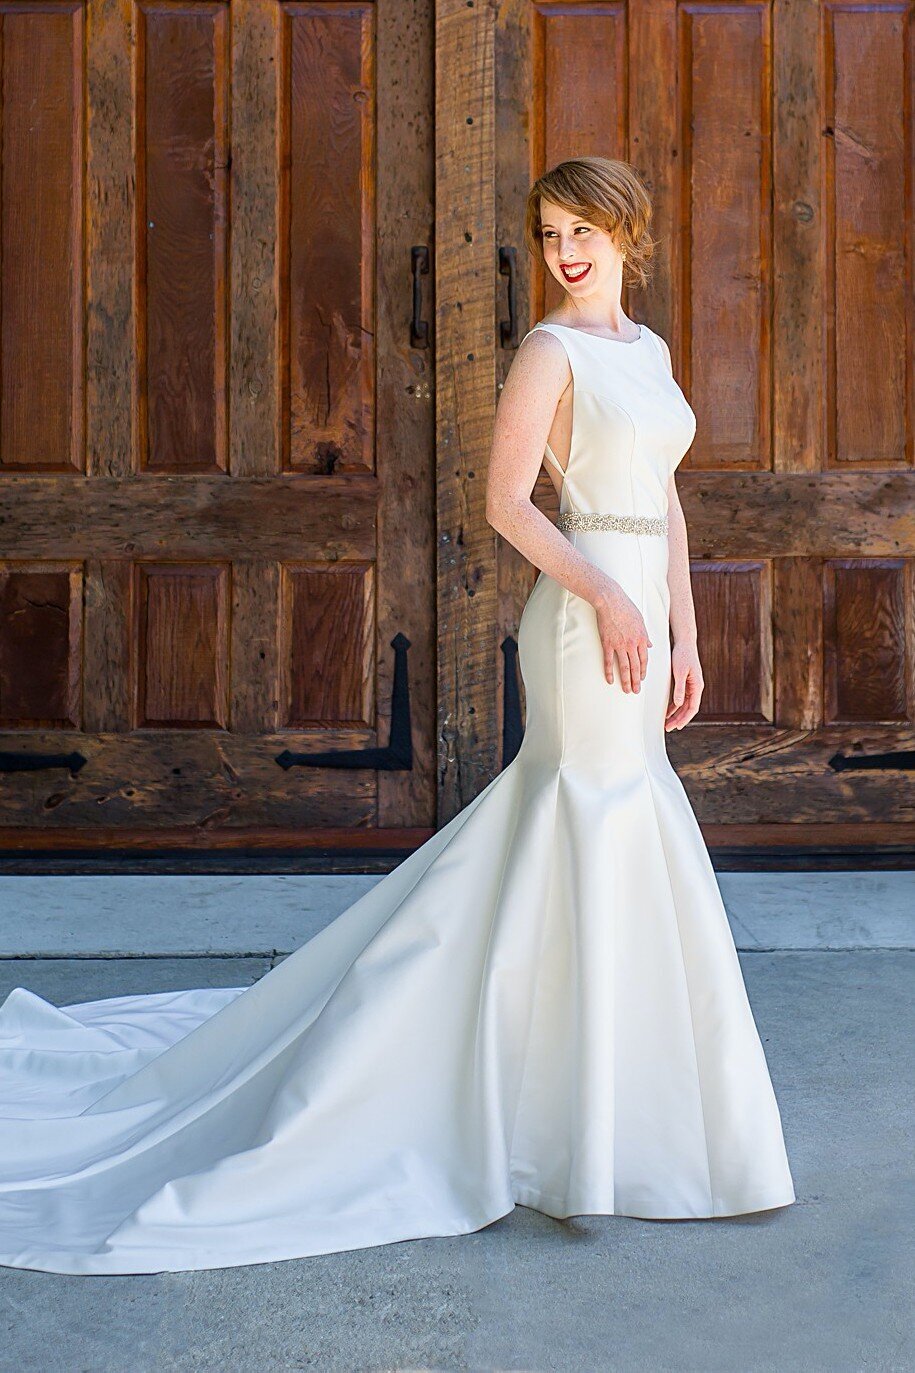 The side view of the Eva wedding dress style shows how the long train flows from the fit-and-flare mikado skirt to accentuate the curves of the body.